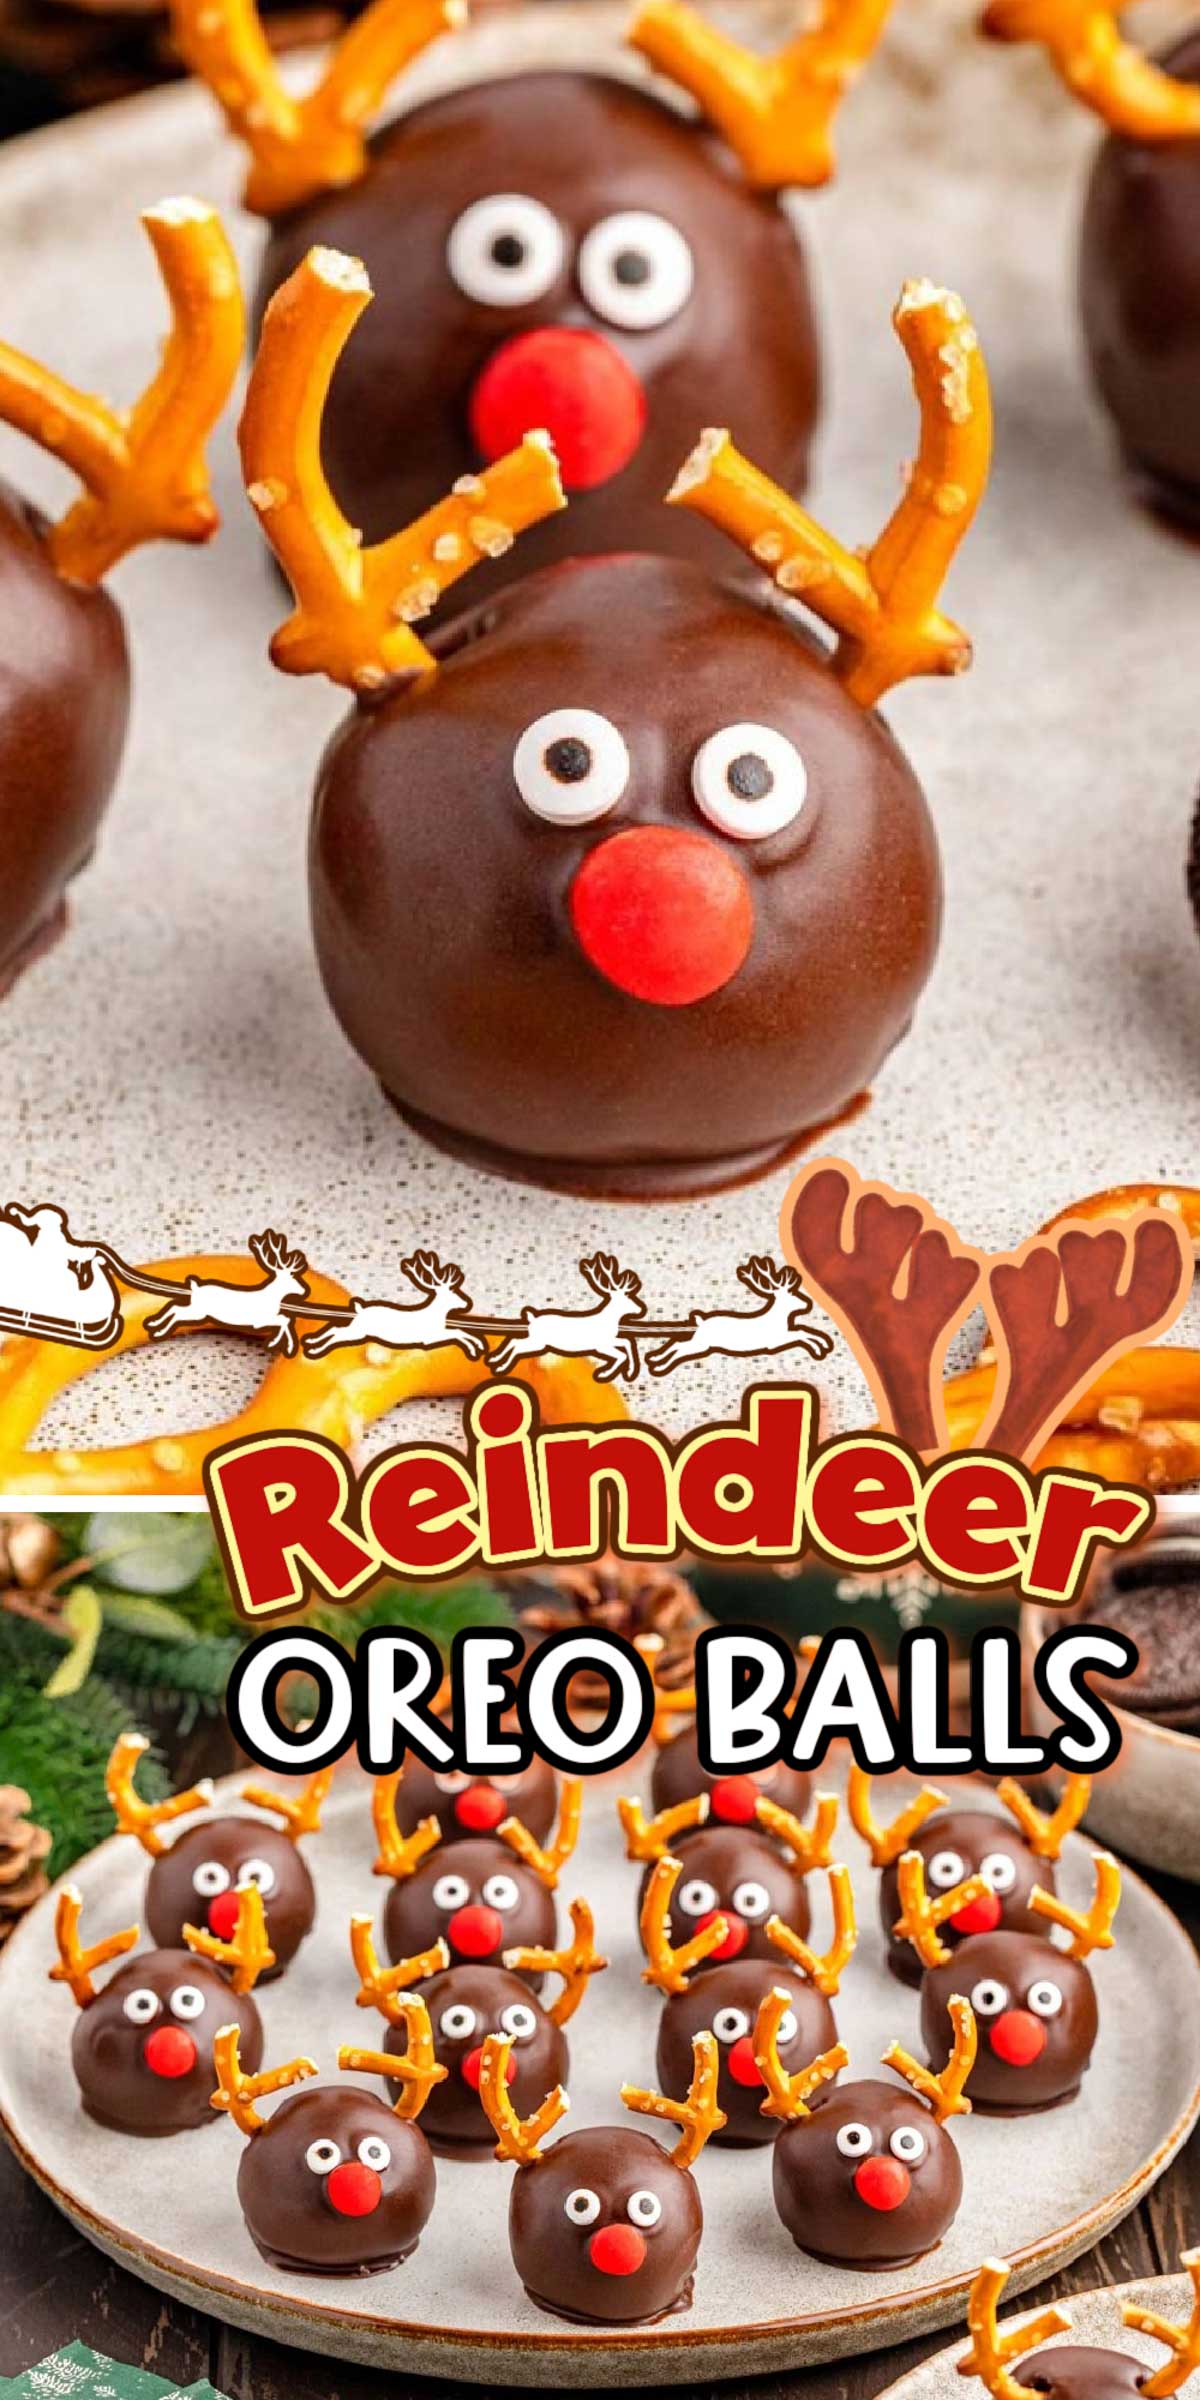 These rich, melt-in-your-mouth Reindeer Oreo Balls are a cute no-bake truffle that will get everyone in the Christmas spirit! Perfect for holiday parties and weekend fun with the kids! via @sugarandsoulco